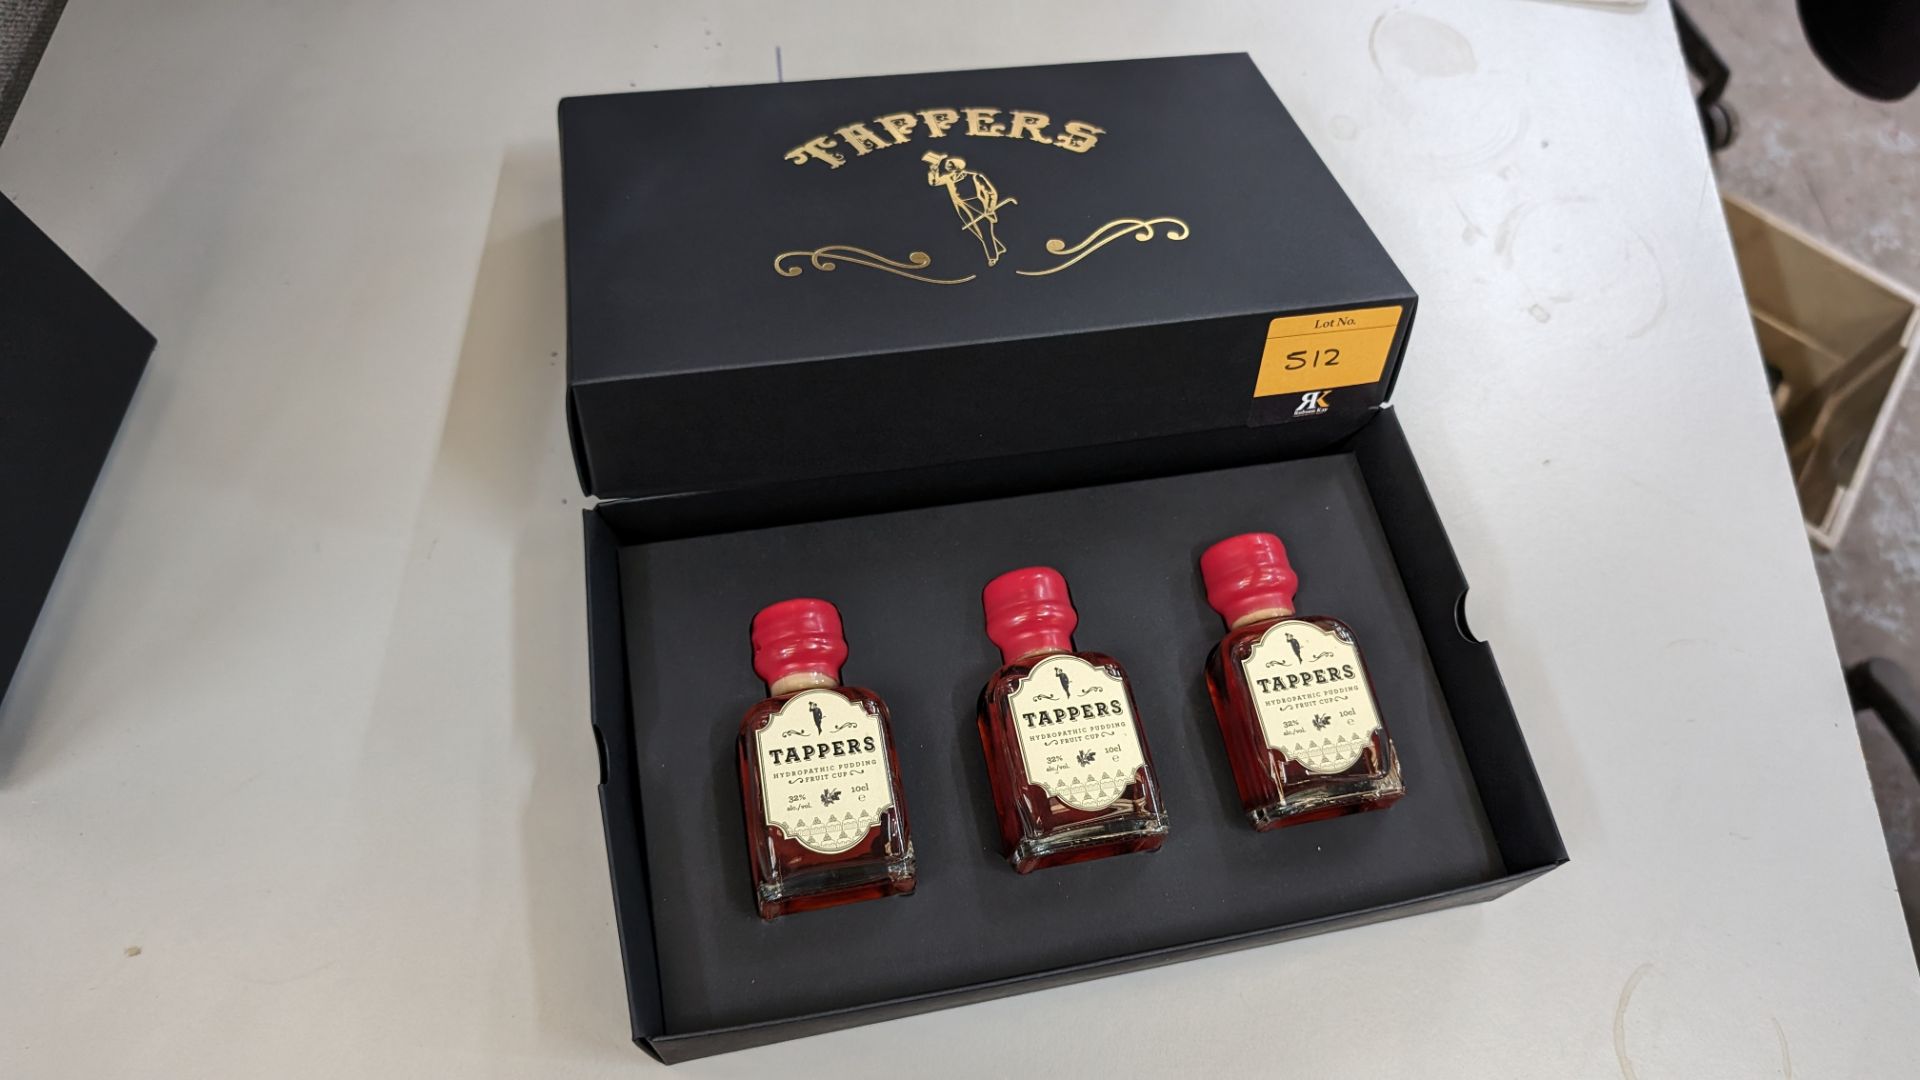 3 off 100ml bottles of Tappers Hydropathic Pudding Fruit Cup, 32% ABV, including a Tappers branded p